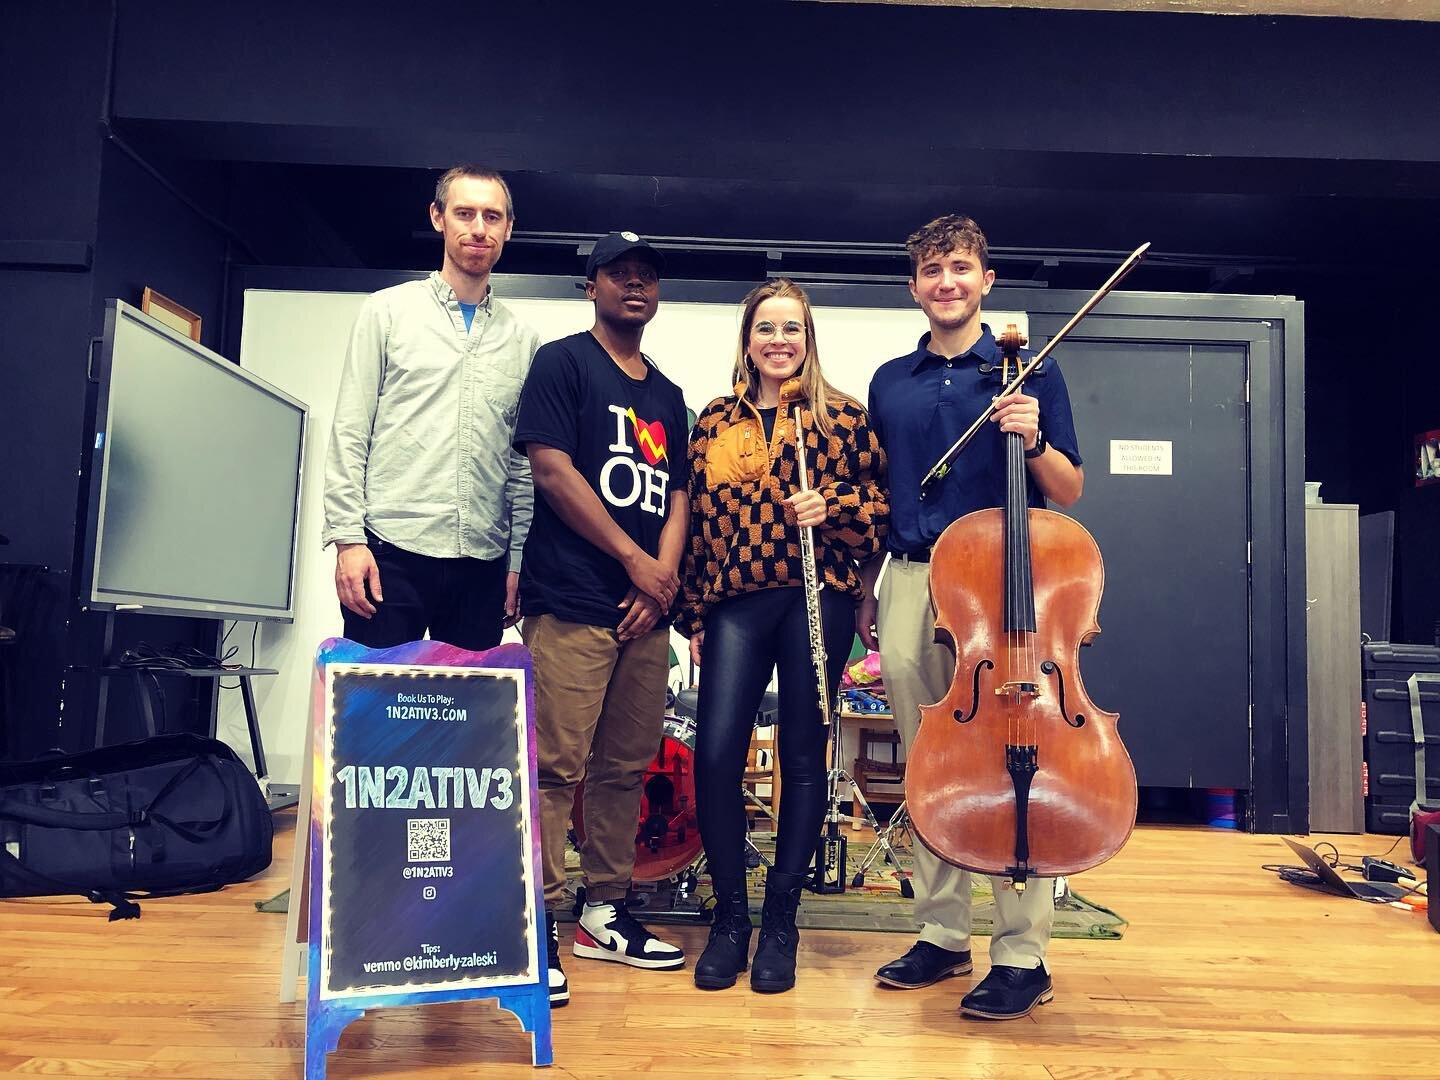 We had a blast performing at Saint Jerome&rsquo;s Elementary School today!  Singing, dancing, drumming, beat-boxing&hellip; what could make for a better morning?  Thank you to @citymusiccleveland for putting these shows together!
&bull;
&bull;
&bull;